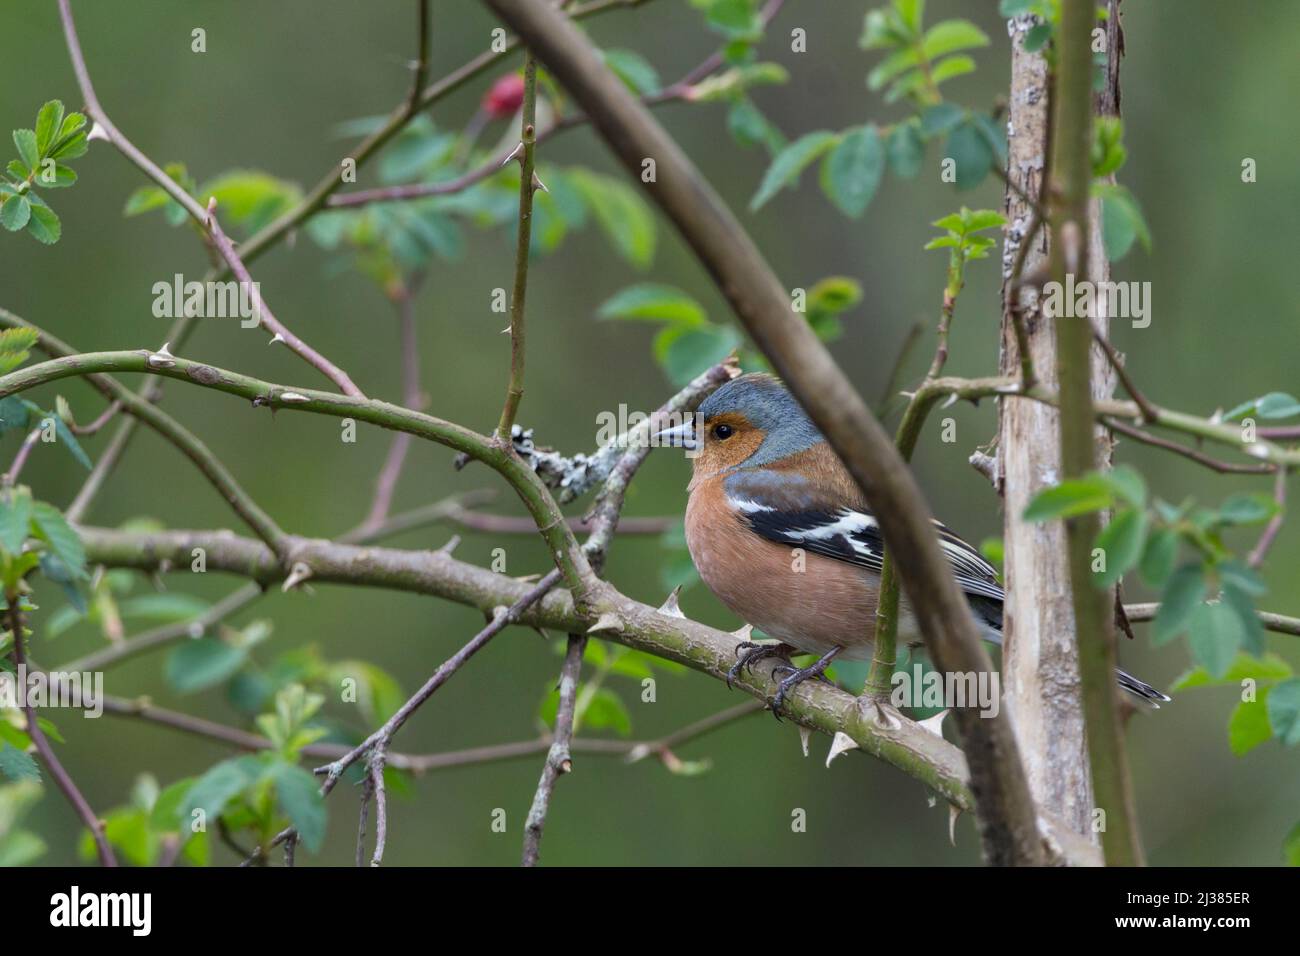 Chaffinch male (Fringilla coelebs) spring plumage reddish pink face and underparts blue crown chestnut back white shoulder patch and wing bar in tree Stock Photo